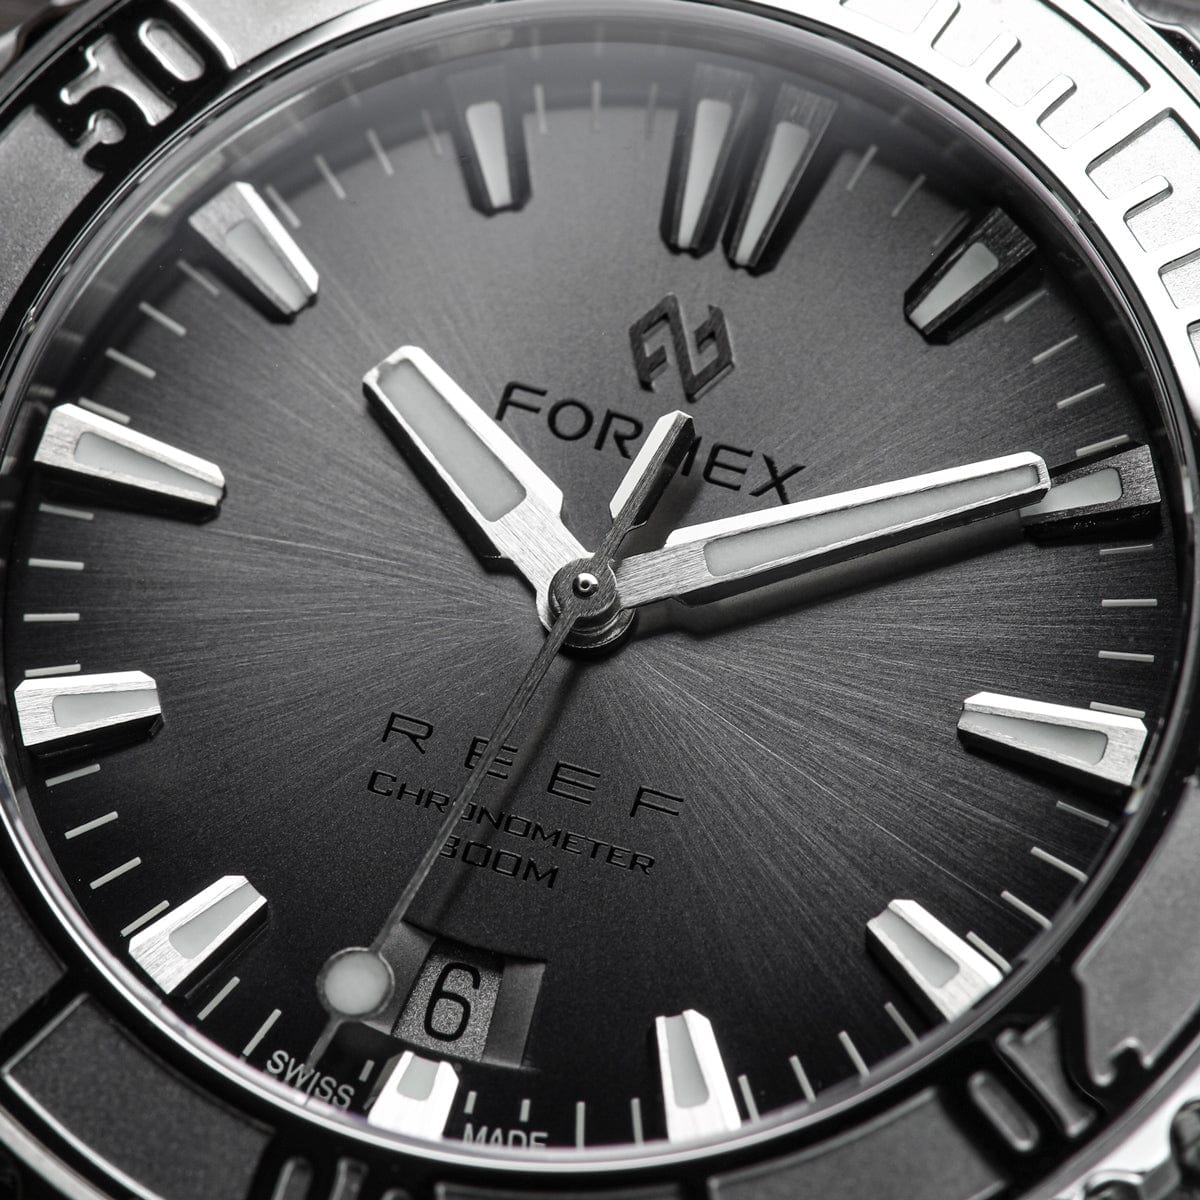 Formex REEF Automatic Chronometer - Silver Dial / Steel Bezel